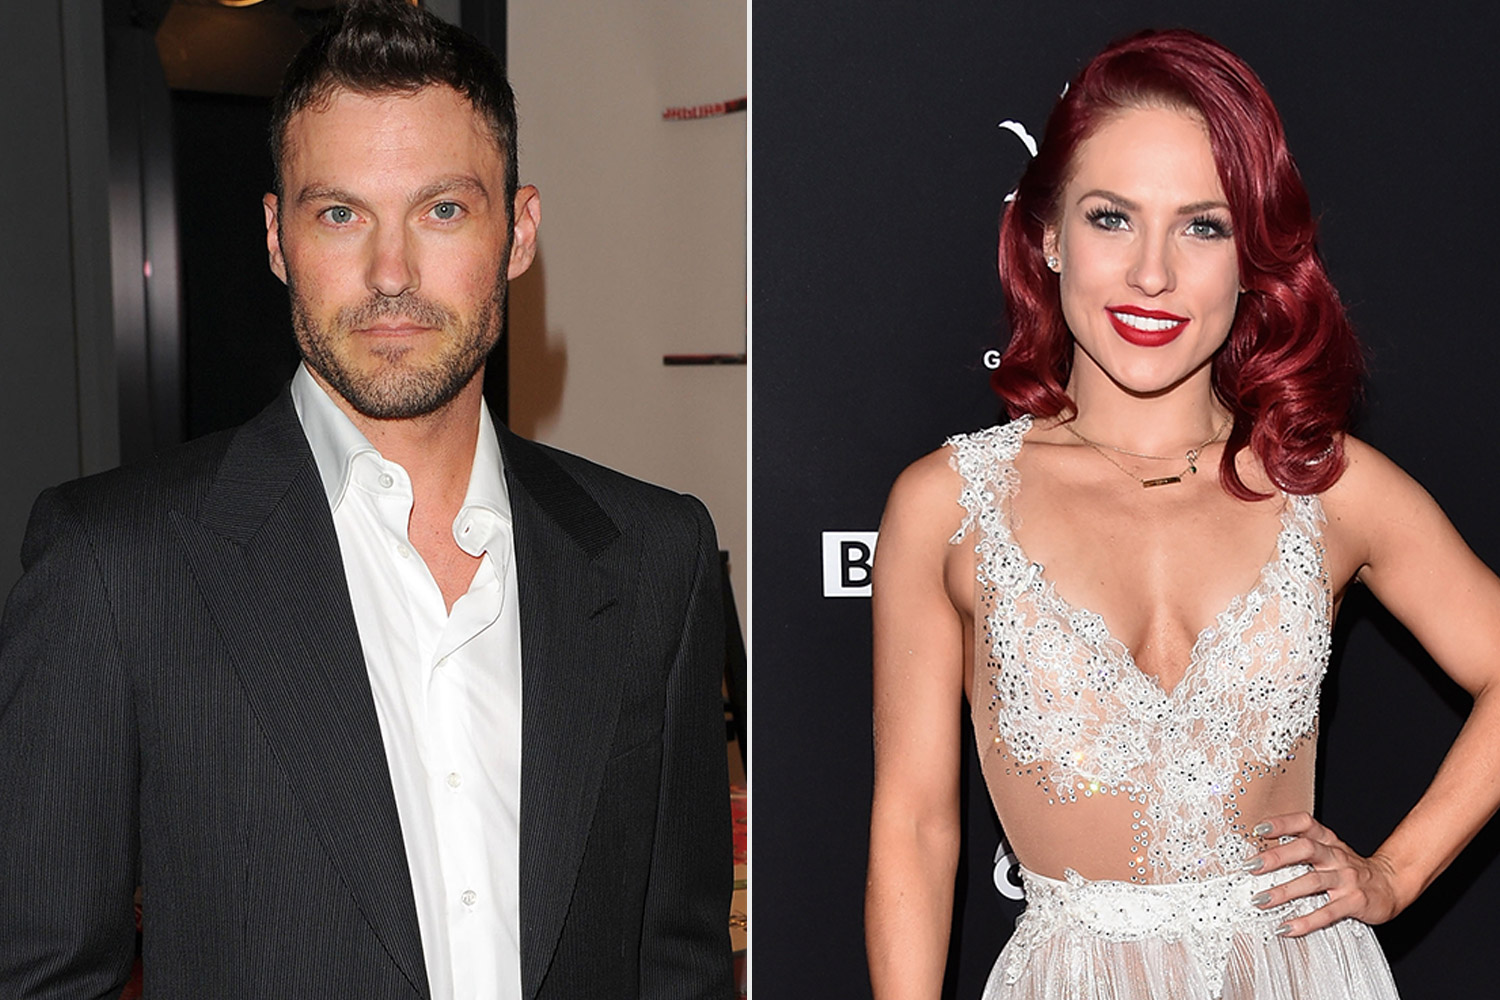 Sharna Burgess Kisses Brian Austin Green on Steamy Photo – Dancing With the Stars Pro!